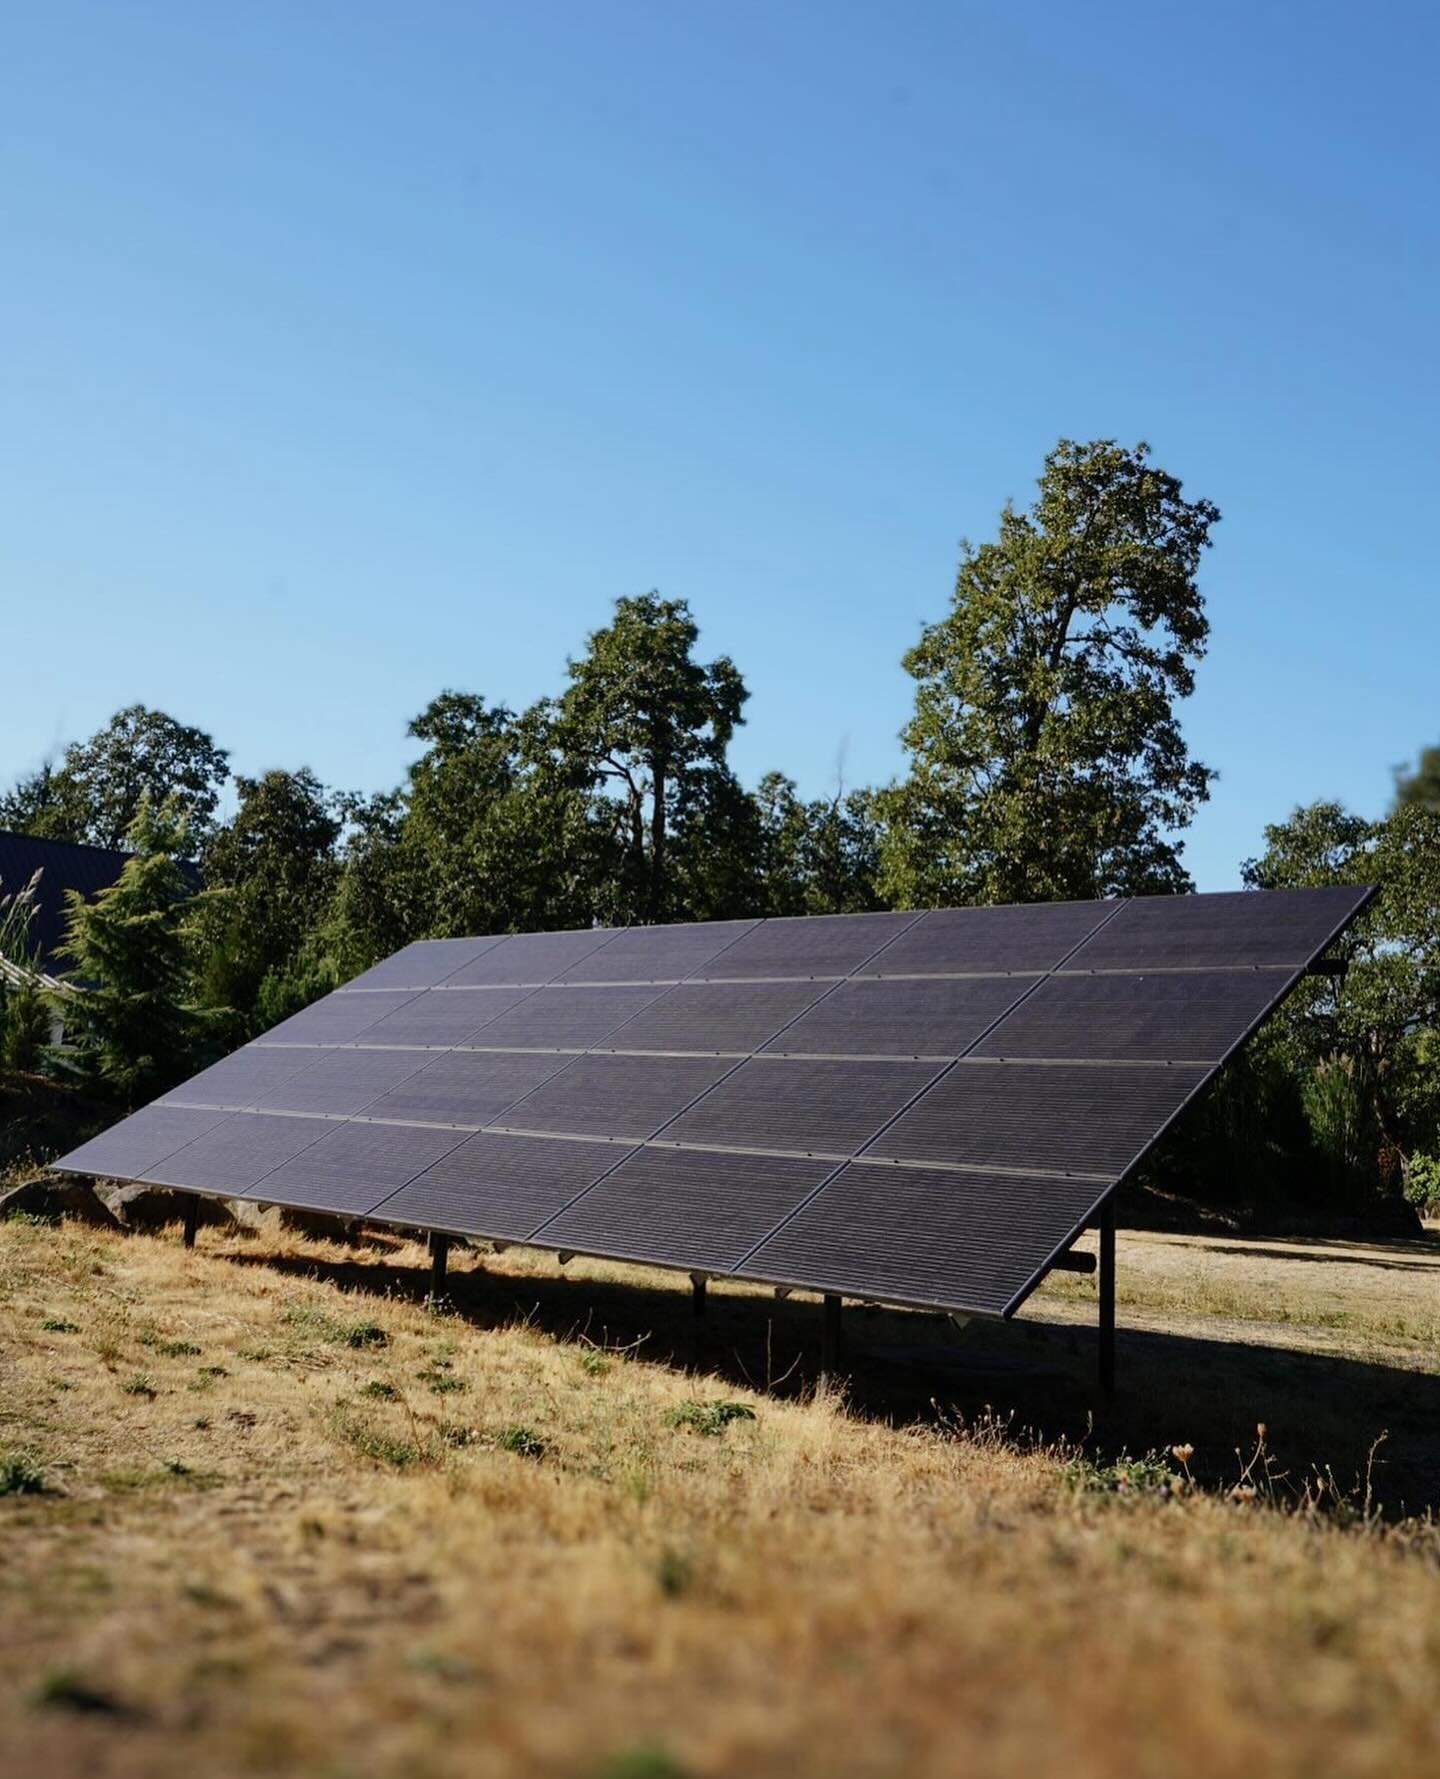 Experience durability with Common Energy, locally based and serving the Columbia River Gorge community. Our solar panels are backed by a 25-year warranty, ensuring many decades of reliable performance. ☀️🌱 #SolarPower #Longevity